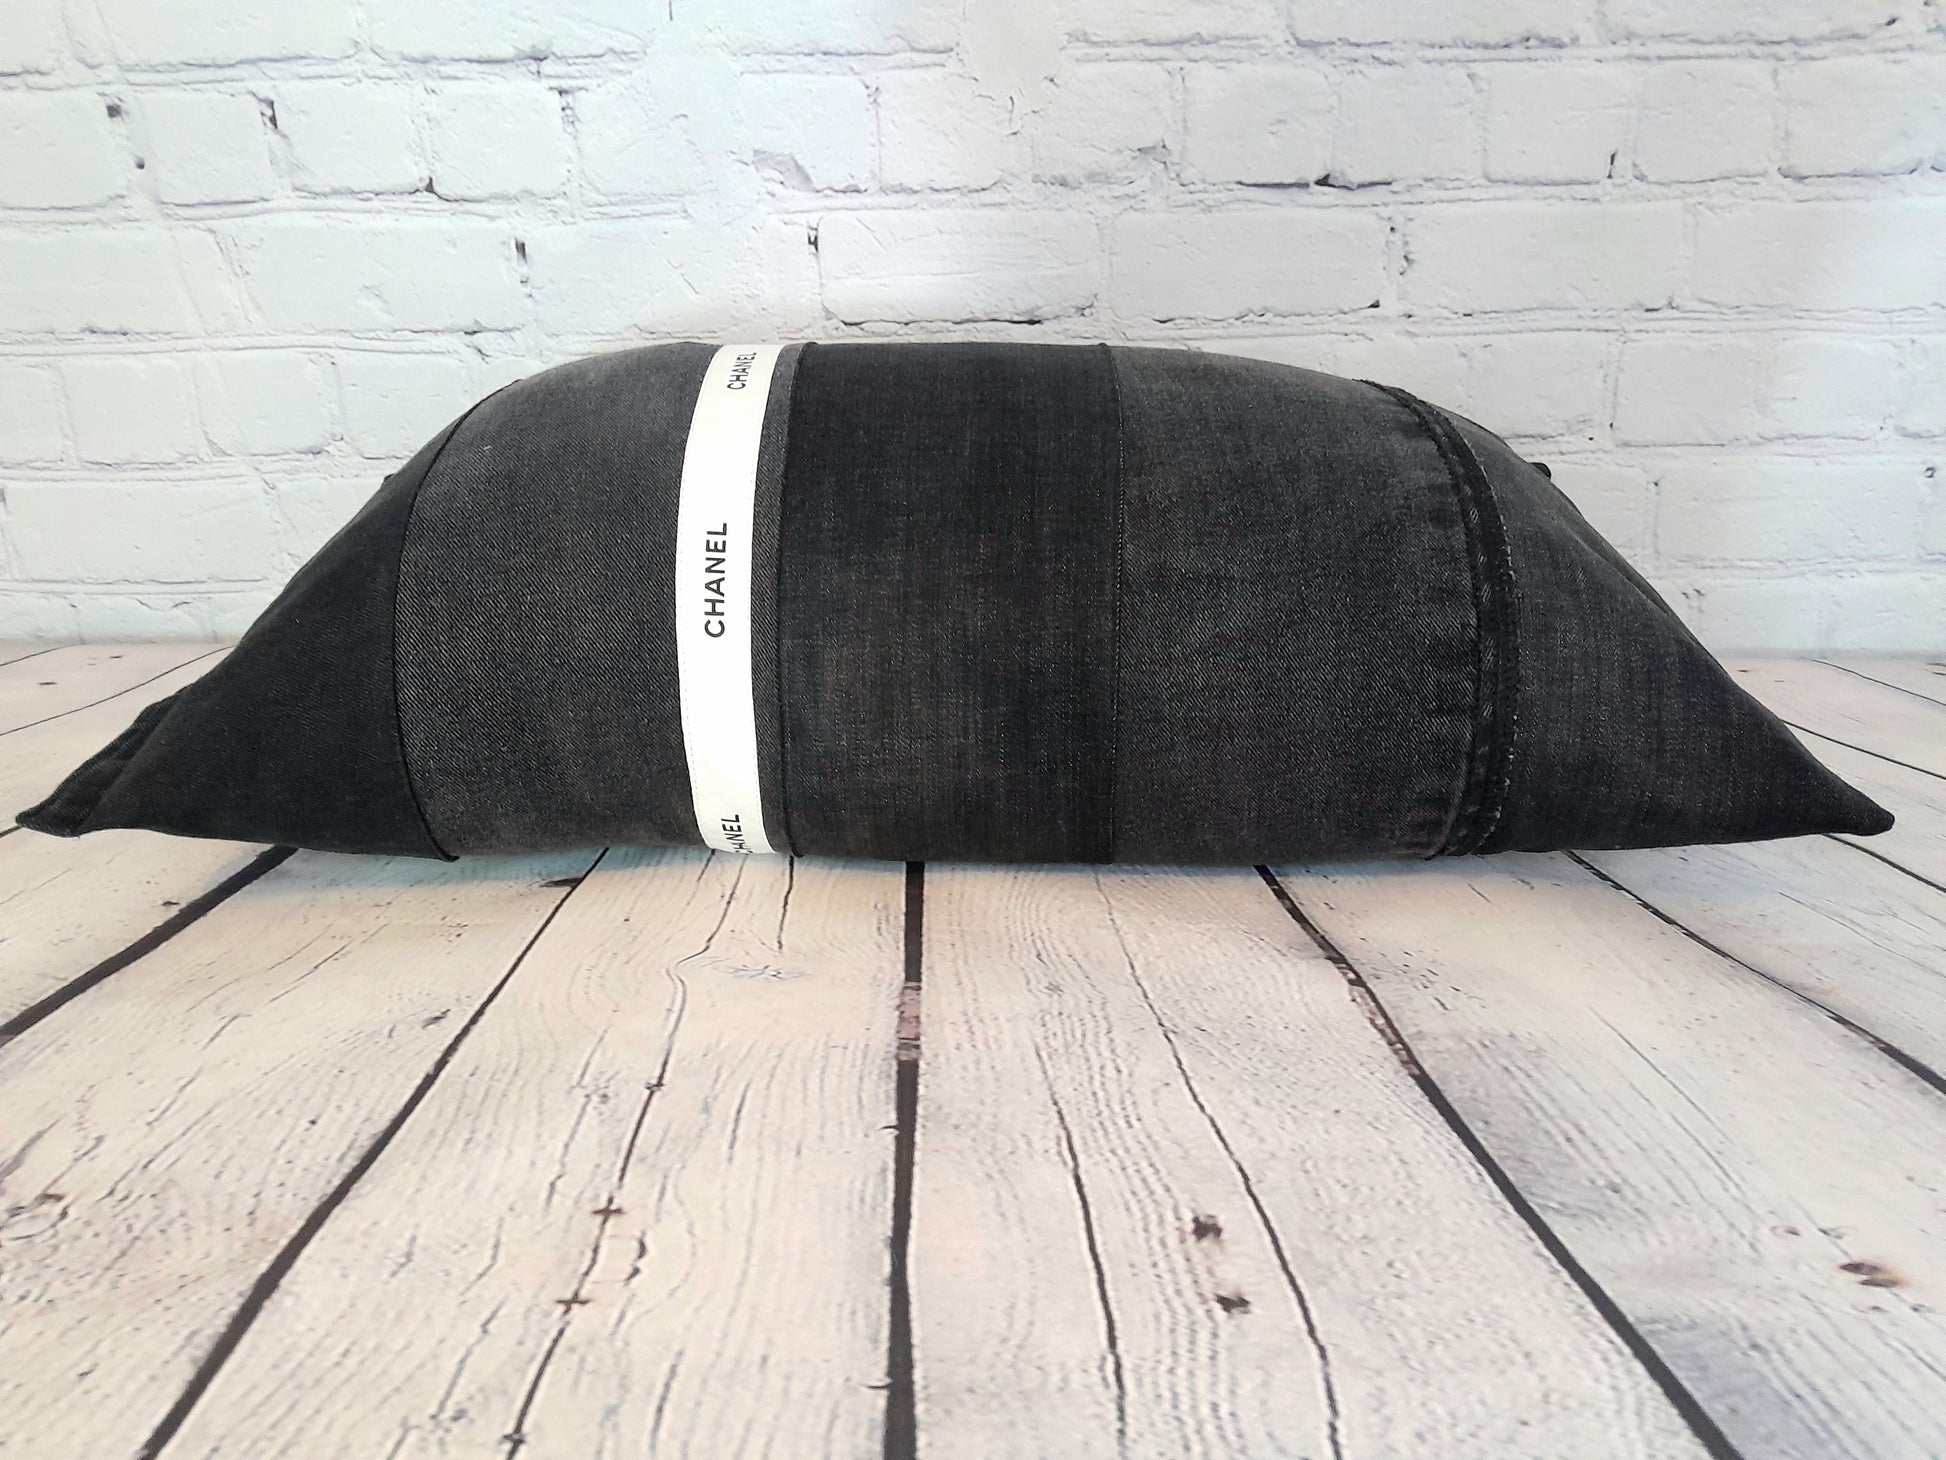 Patchwork bolster cushion pillow made by upcycling waste black denim and white Chanel ribbon.